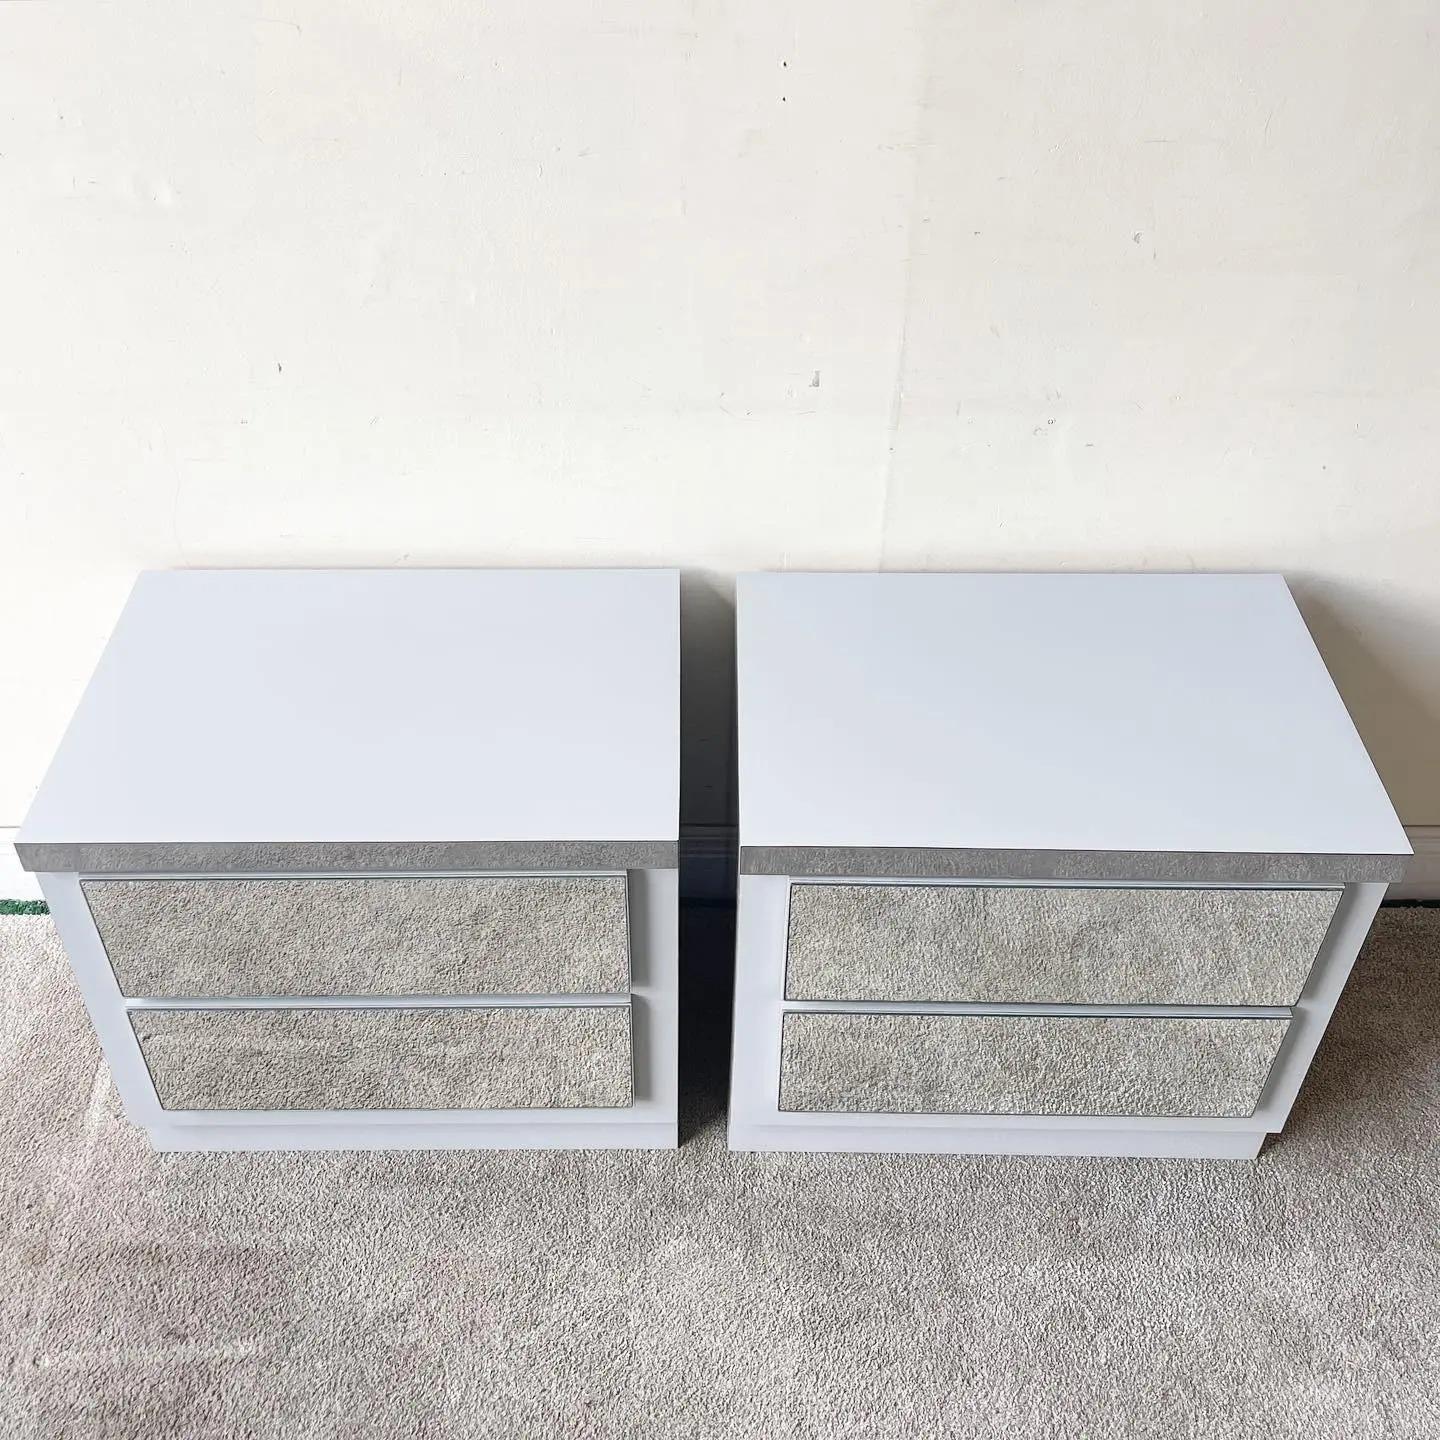 Pair of Postmodern Gray Lacquer Laminate Nightstands, 1980s